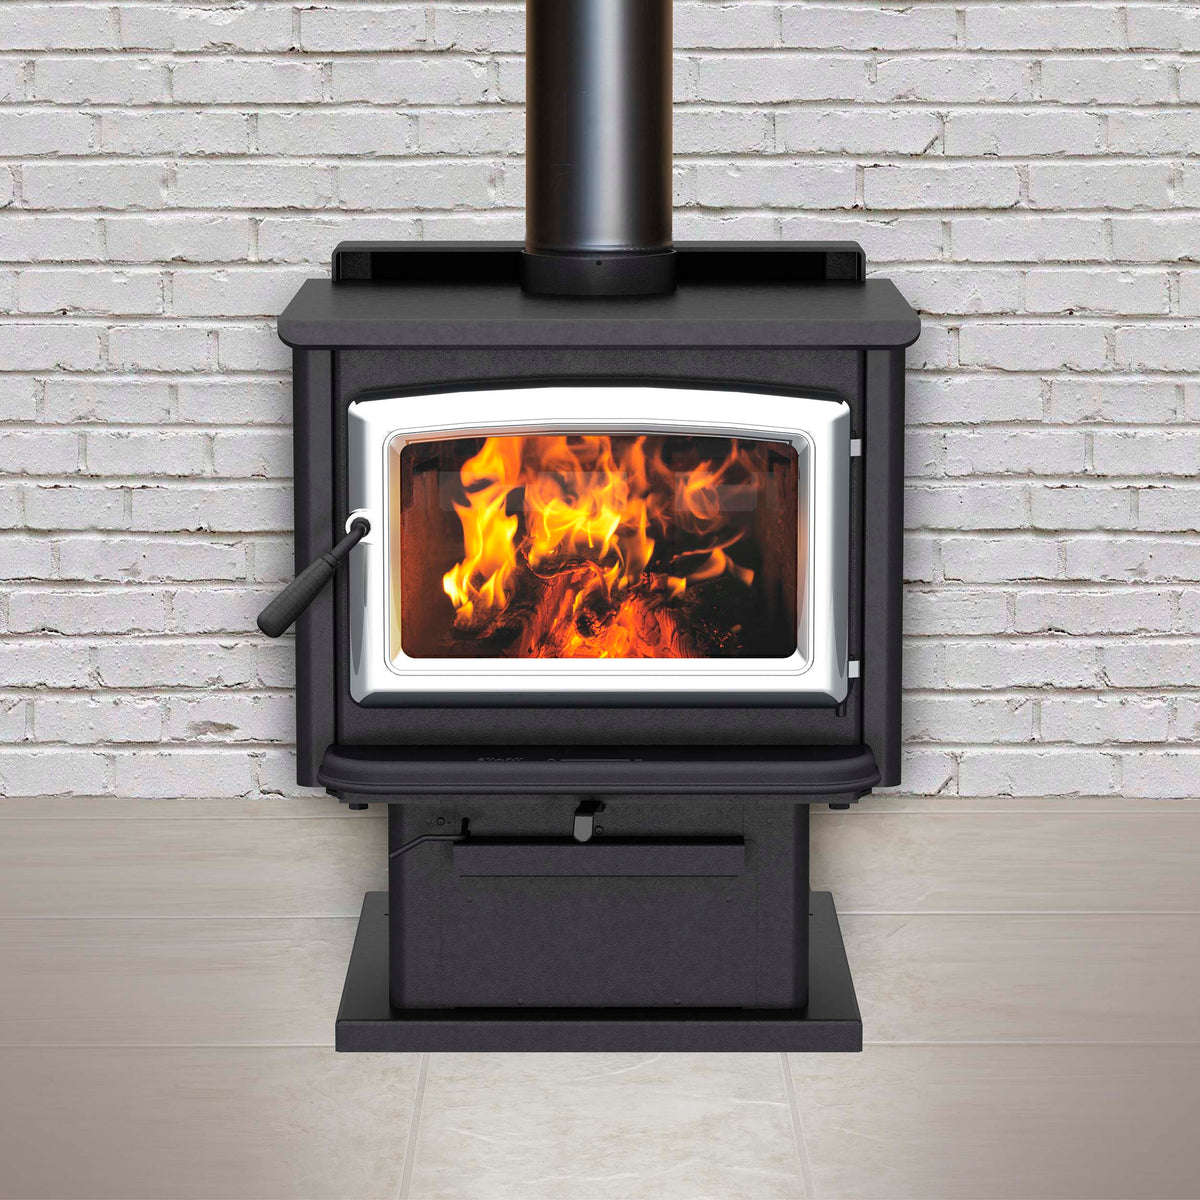 Pacific Energy Super LE Traditional Steel Wood Stove - Freestanding with Legs